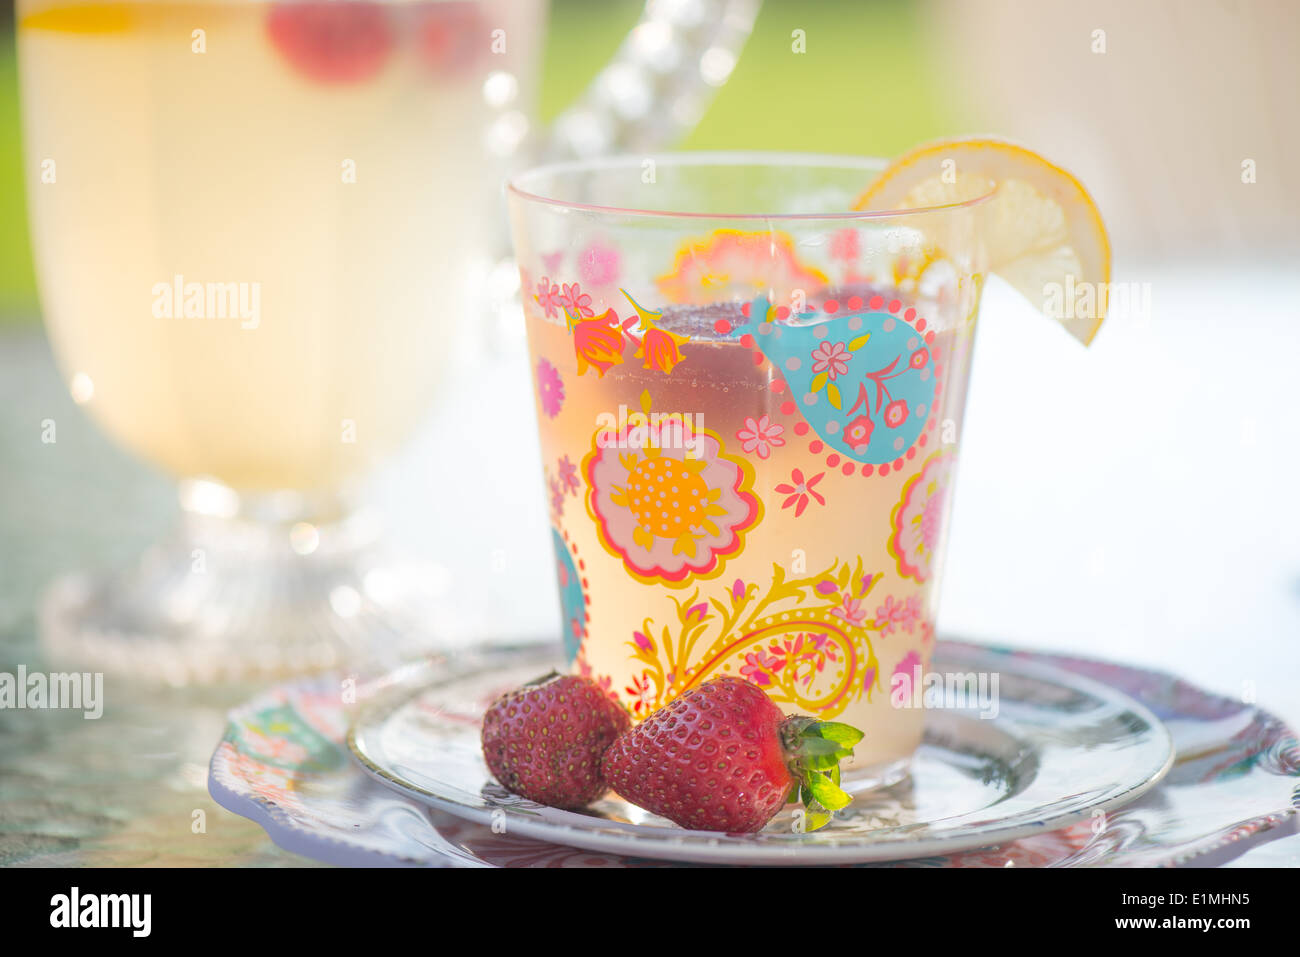 A colorful glass of lemonade with fresh strawberries as a garnish. Stock Photo